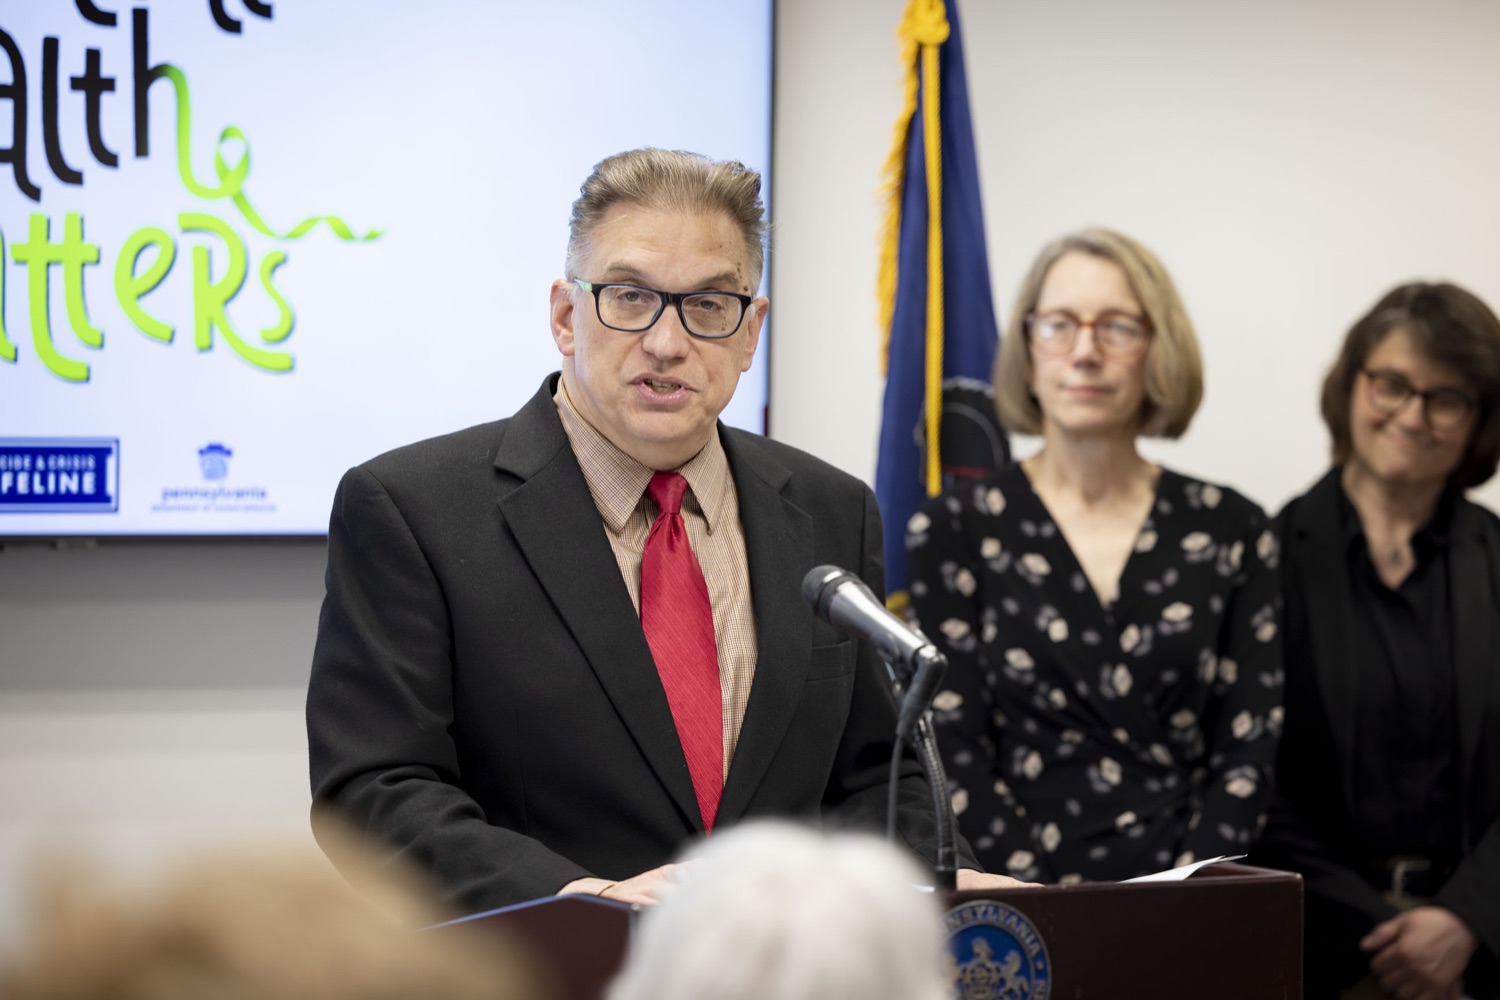 Cumberland County Commissioner Gary Eichelberger discusses the importance of increasing funding for county mental health programs, in Carlisle, PA on May 24, 2023.<br><a href="https://filesource.amperwave.net/commonwealthofpa/photo/23090_dhs_mentalHealth_06.jpg" target="_blank">⇣ Download Photo</a>